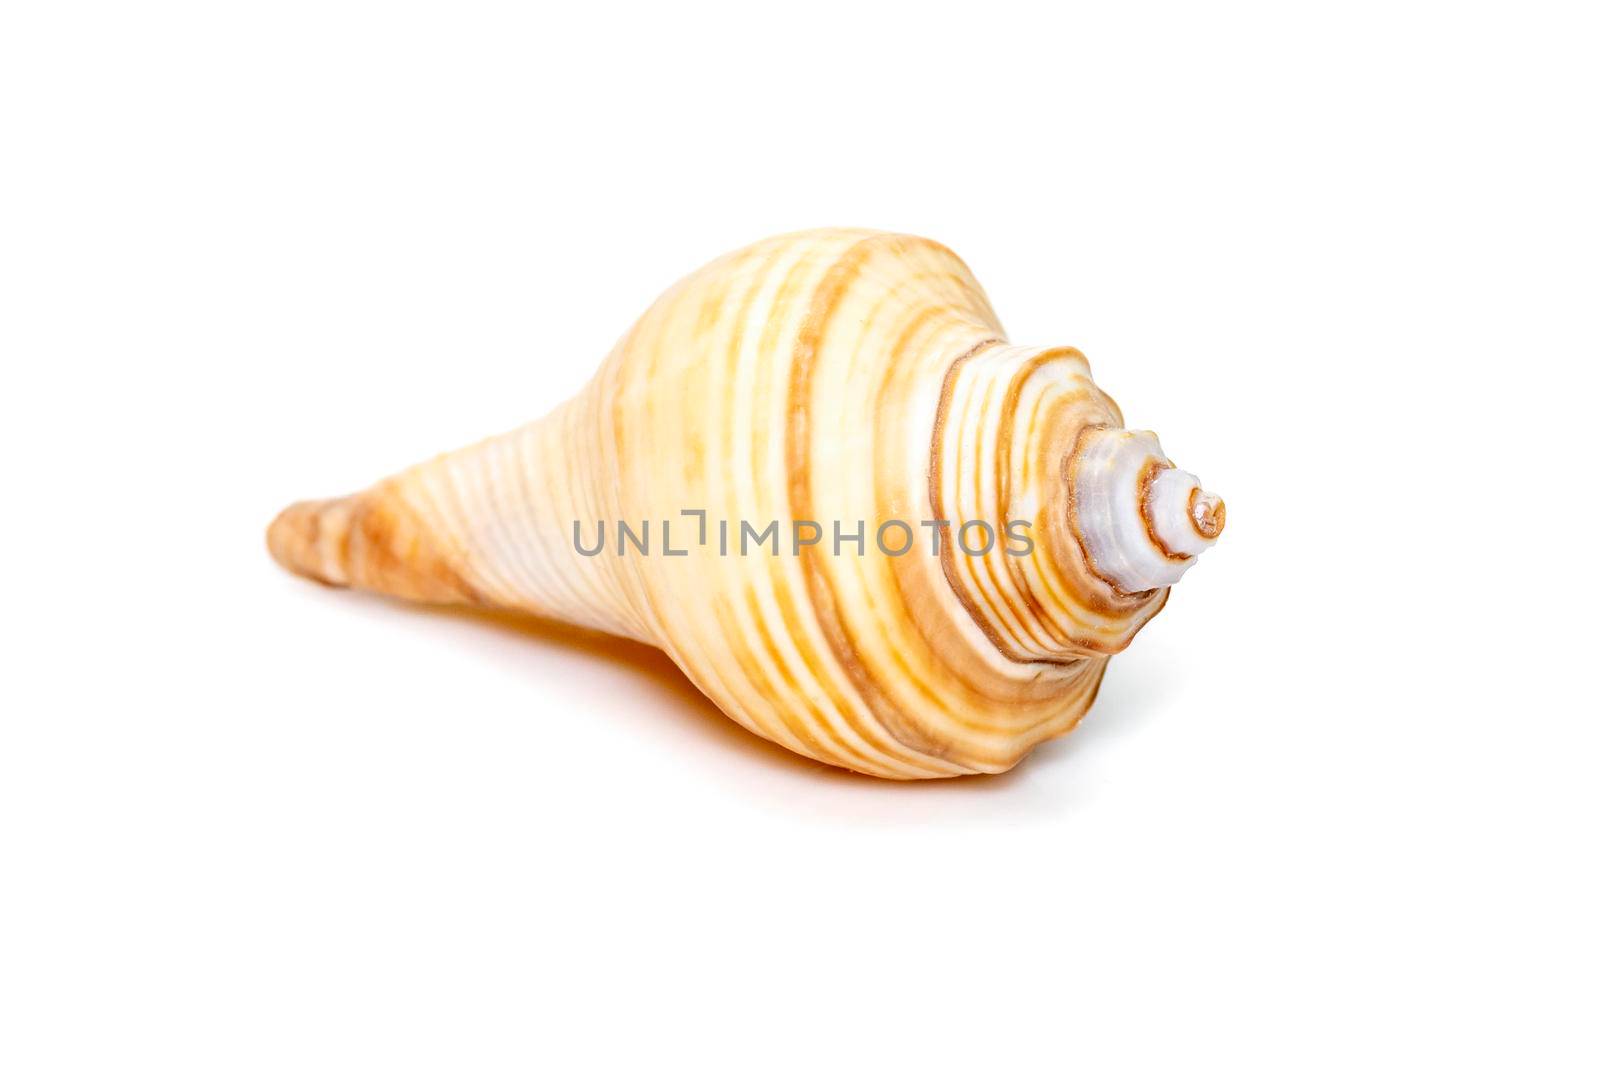 Image of hemifusus sea shells a genus of marine gastropod mollusks in the family Melongenidae isolated on white background. Undersea Animals. Sea Shells. by yod67